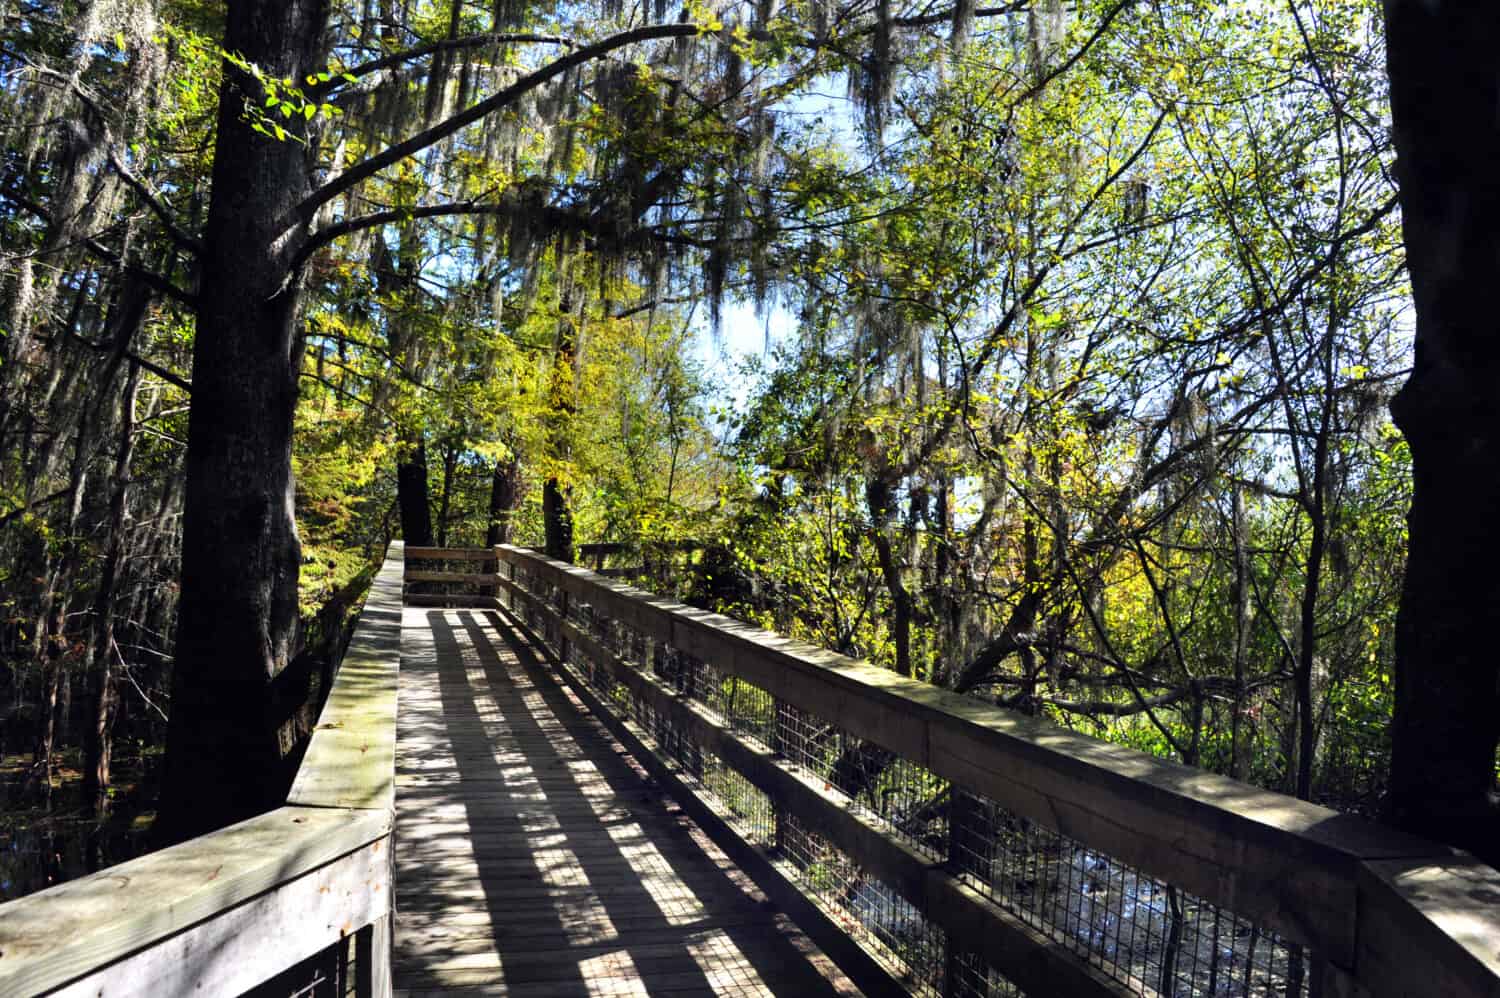 Rustic, wooden boardwalk twists through a tunnel of trees and branches along the Black Bayou Lake in the Black Bayou Lake National Wildlife Refuge in Monroe, Louisiana.